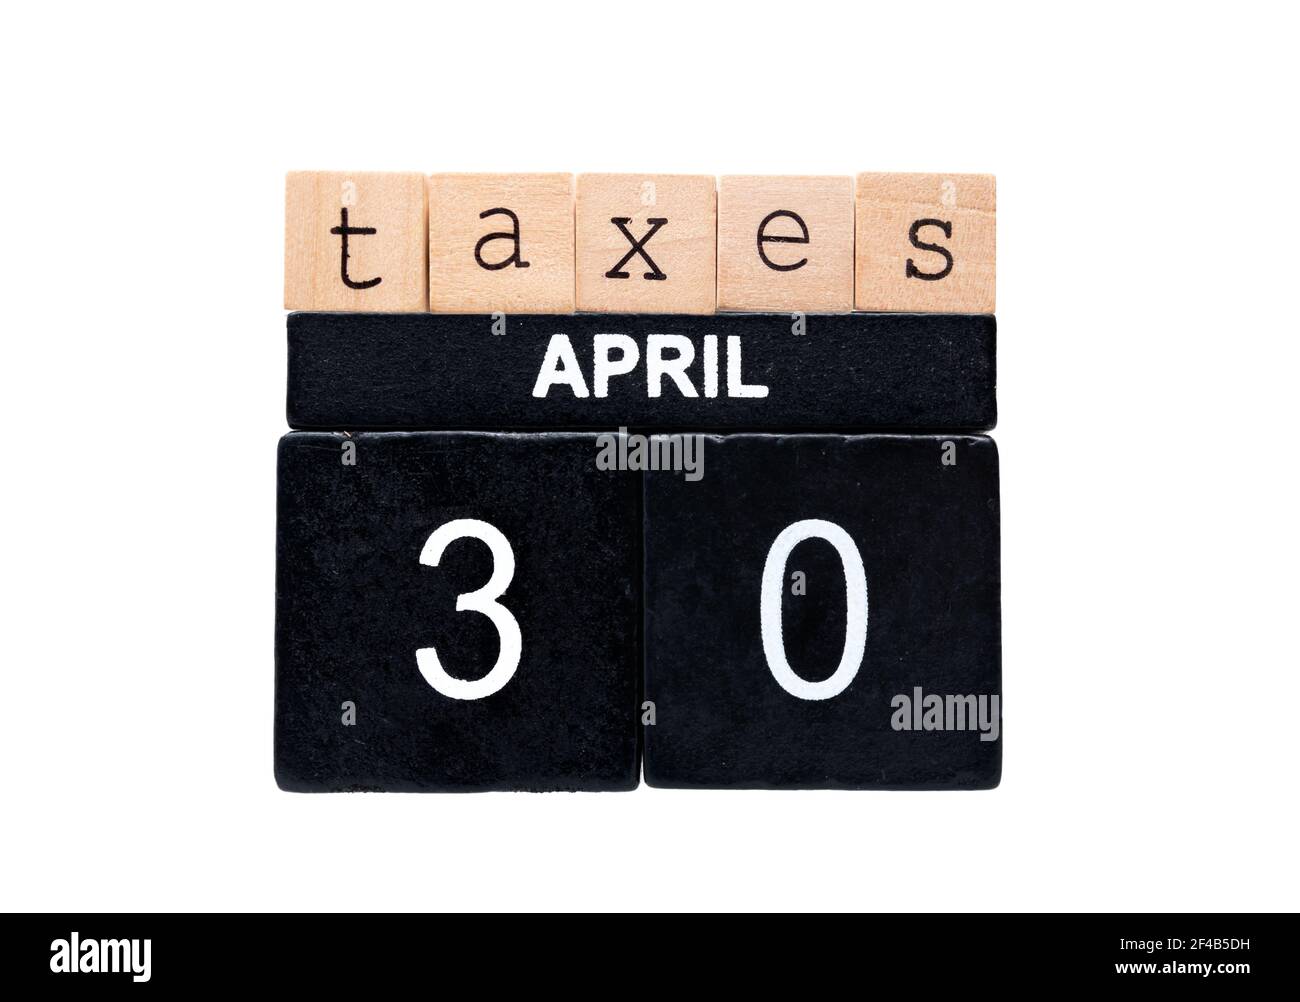 Taxes April 30 spelled with wood block letters. Concept for tax return deadline for individual tax returns in Canada. Light brown and black wood block Stock Photo